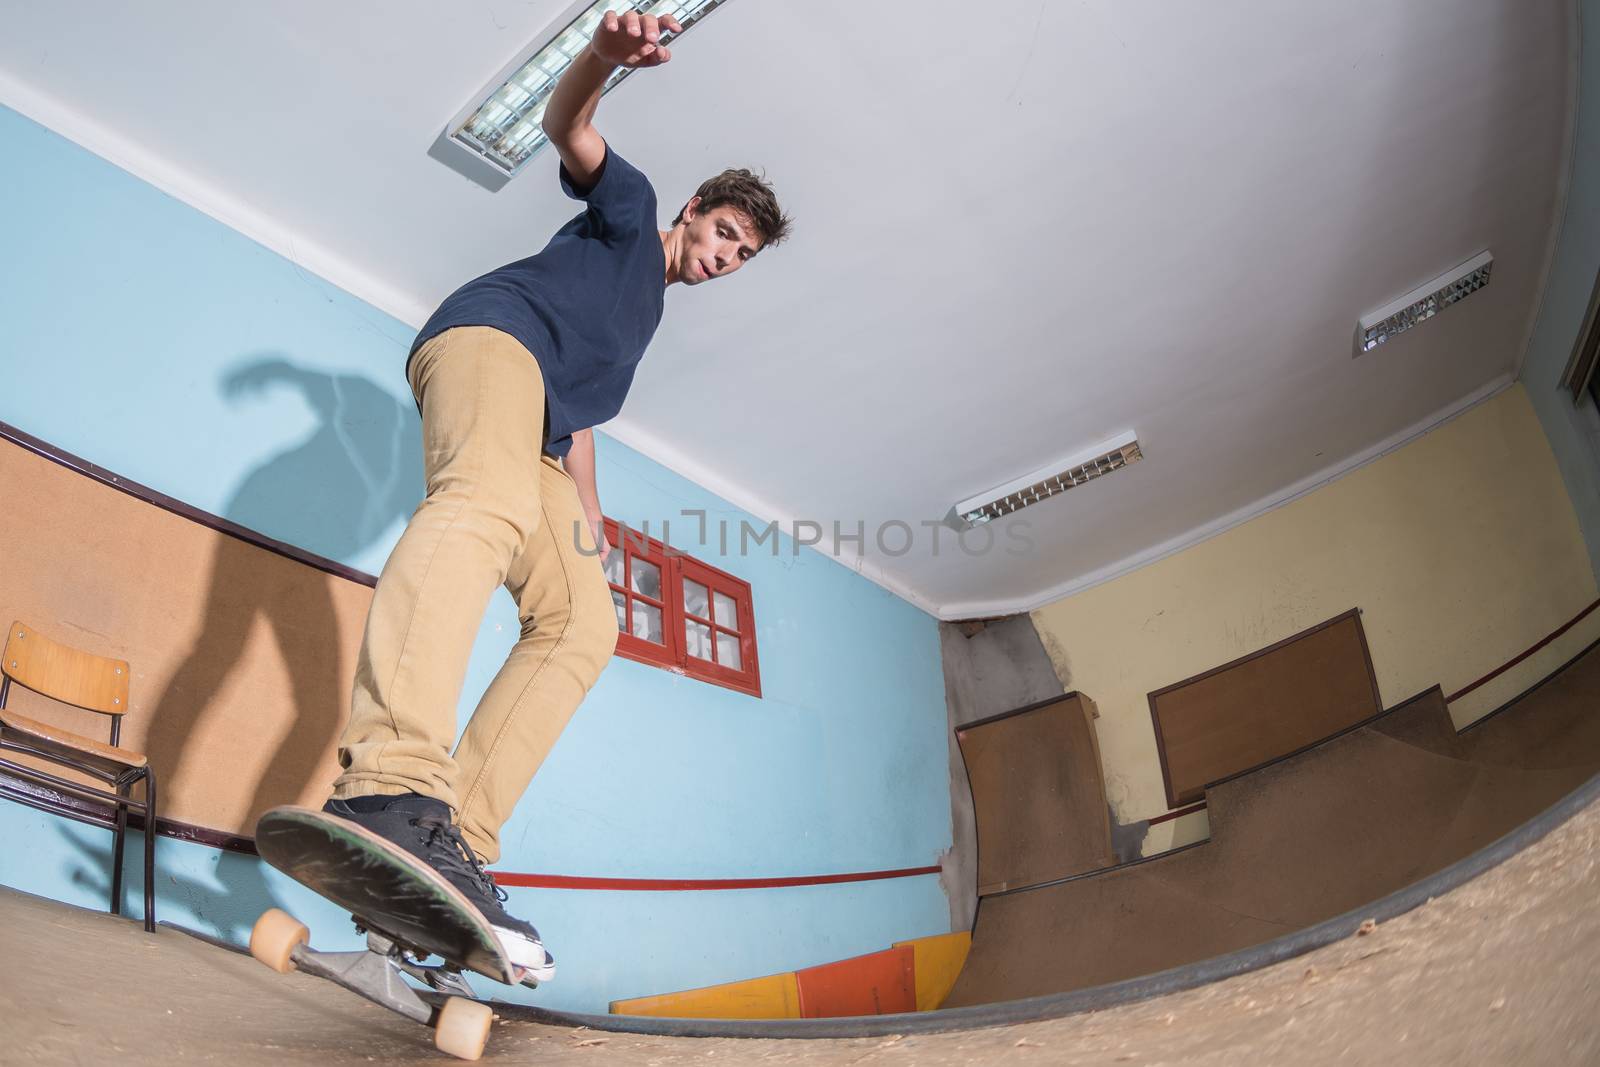 Skateboarder performing a trick by homydesign